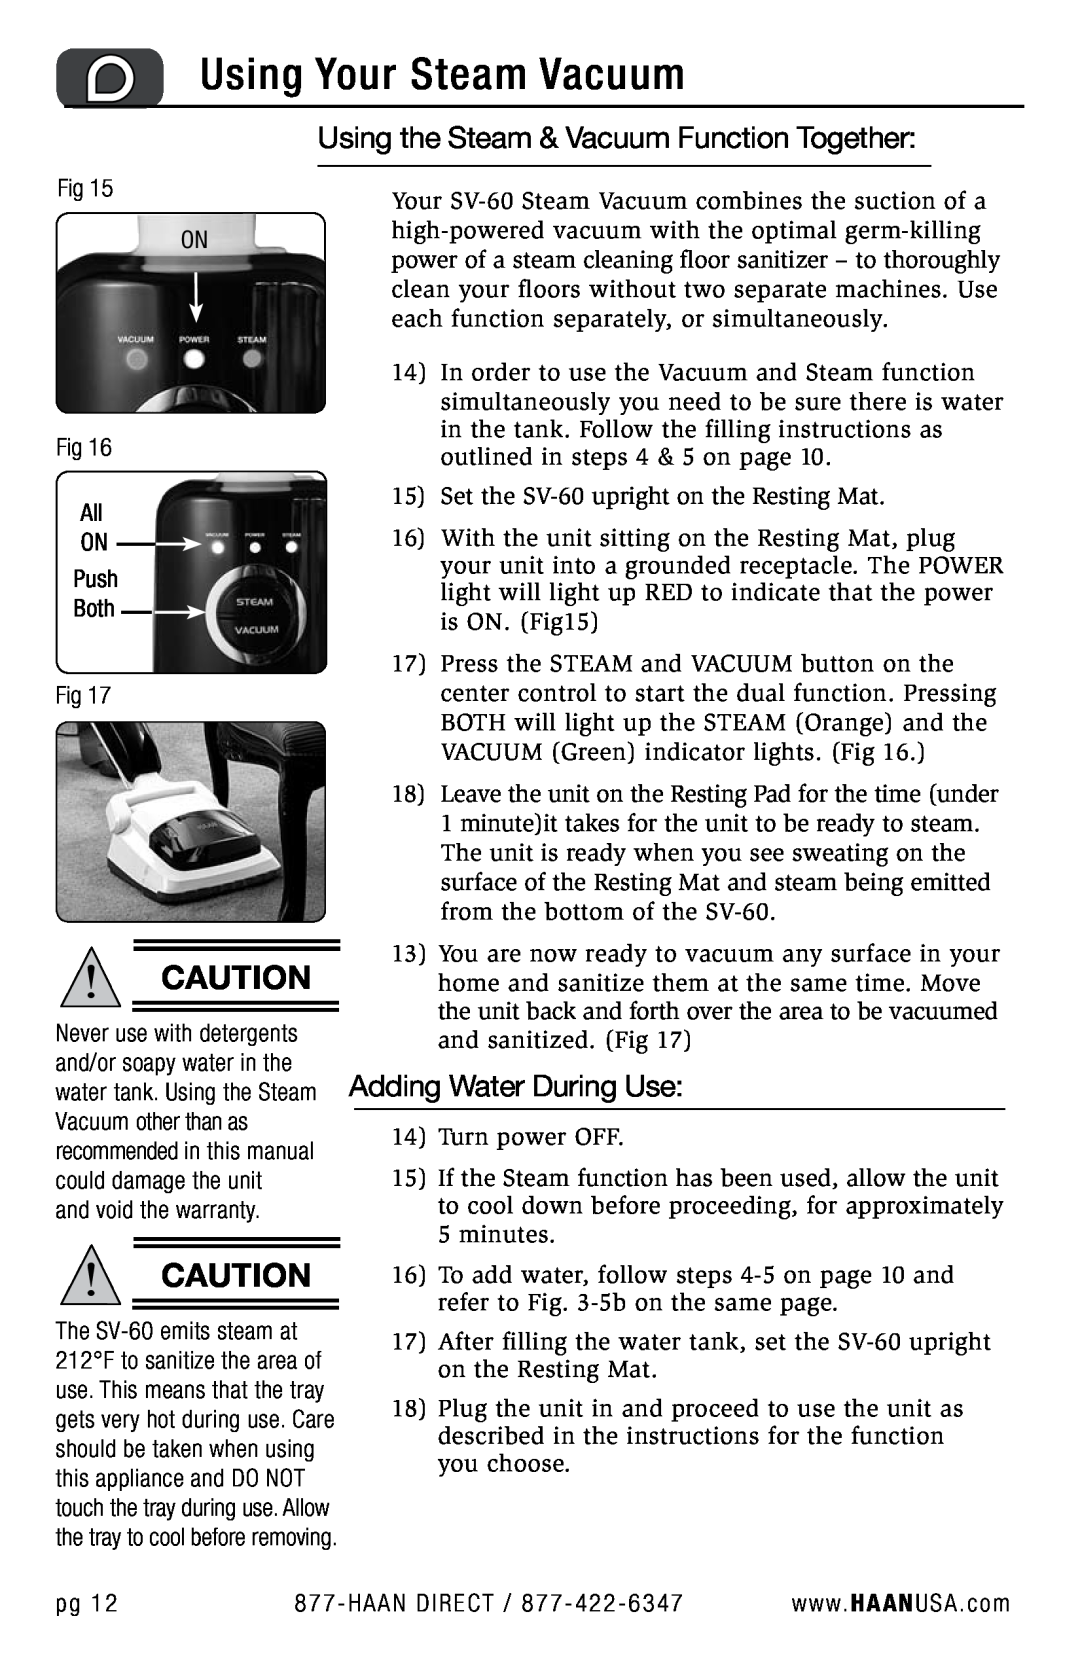 Haan SV-60 user manual Using Your Steam Vacuum, Using the Steam & Vacuum Function Together, Adding Water During Use 